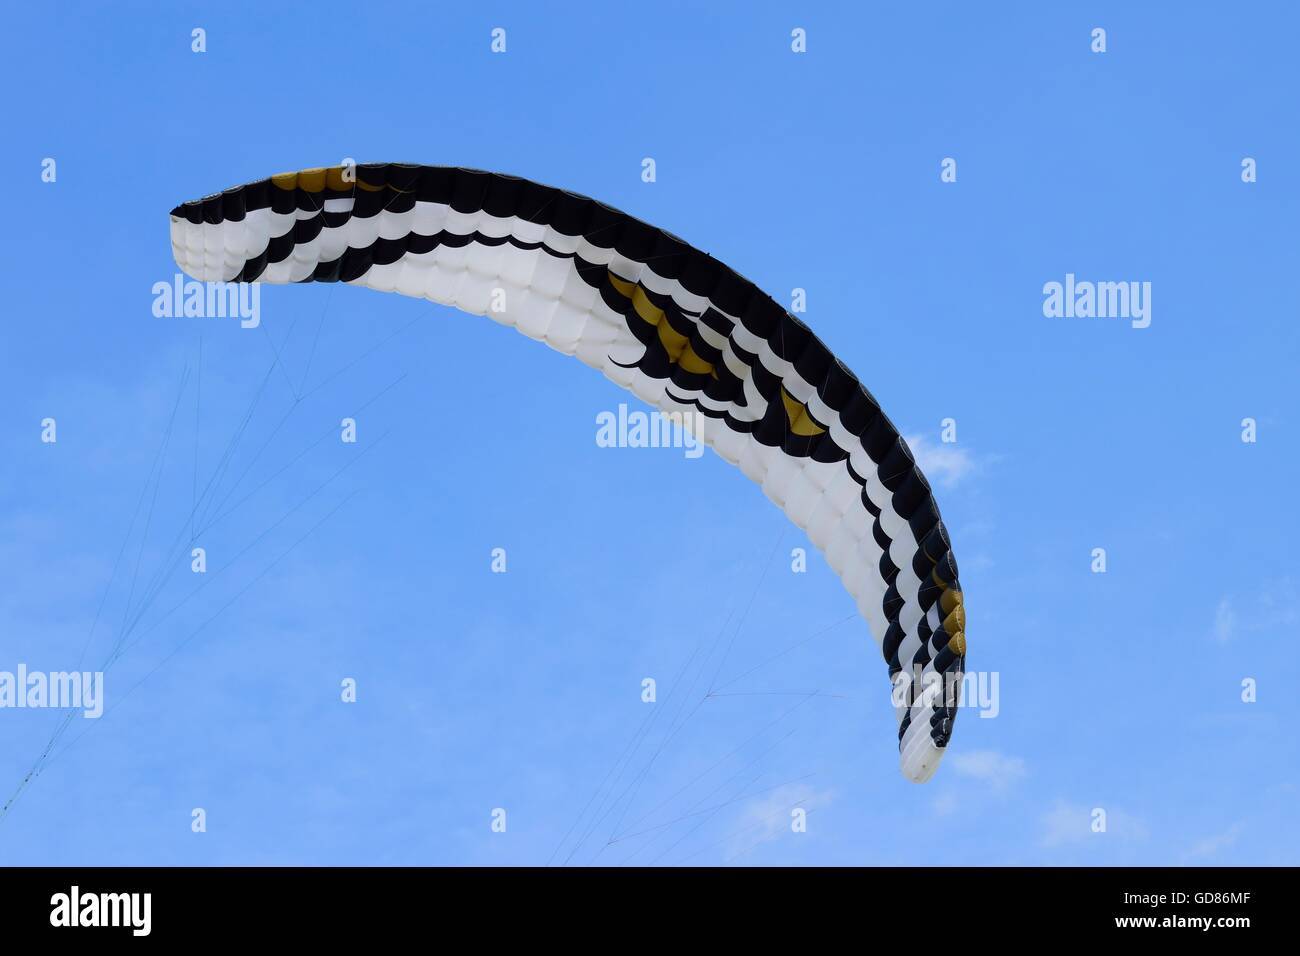 Kite surfing kite catching the wind at Fort De Soto Park,Florida Stock Photo